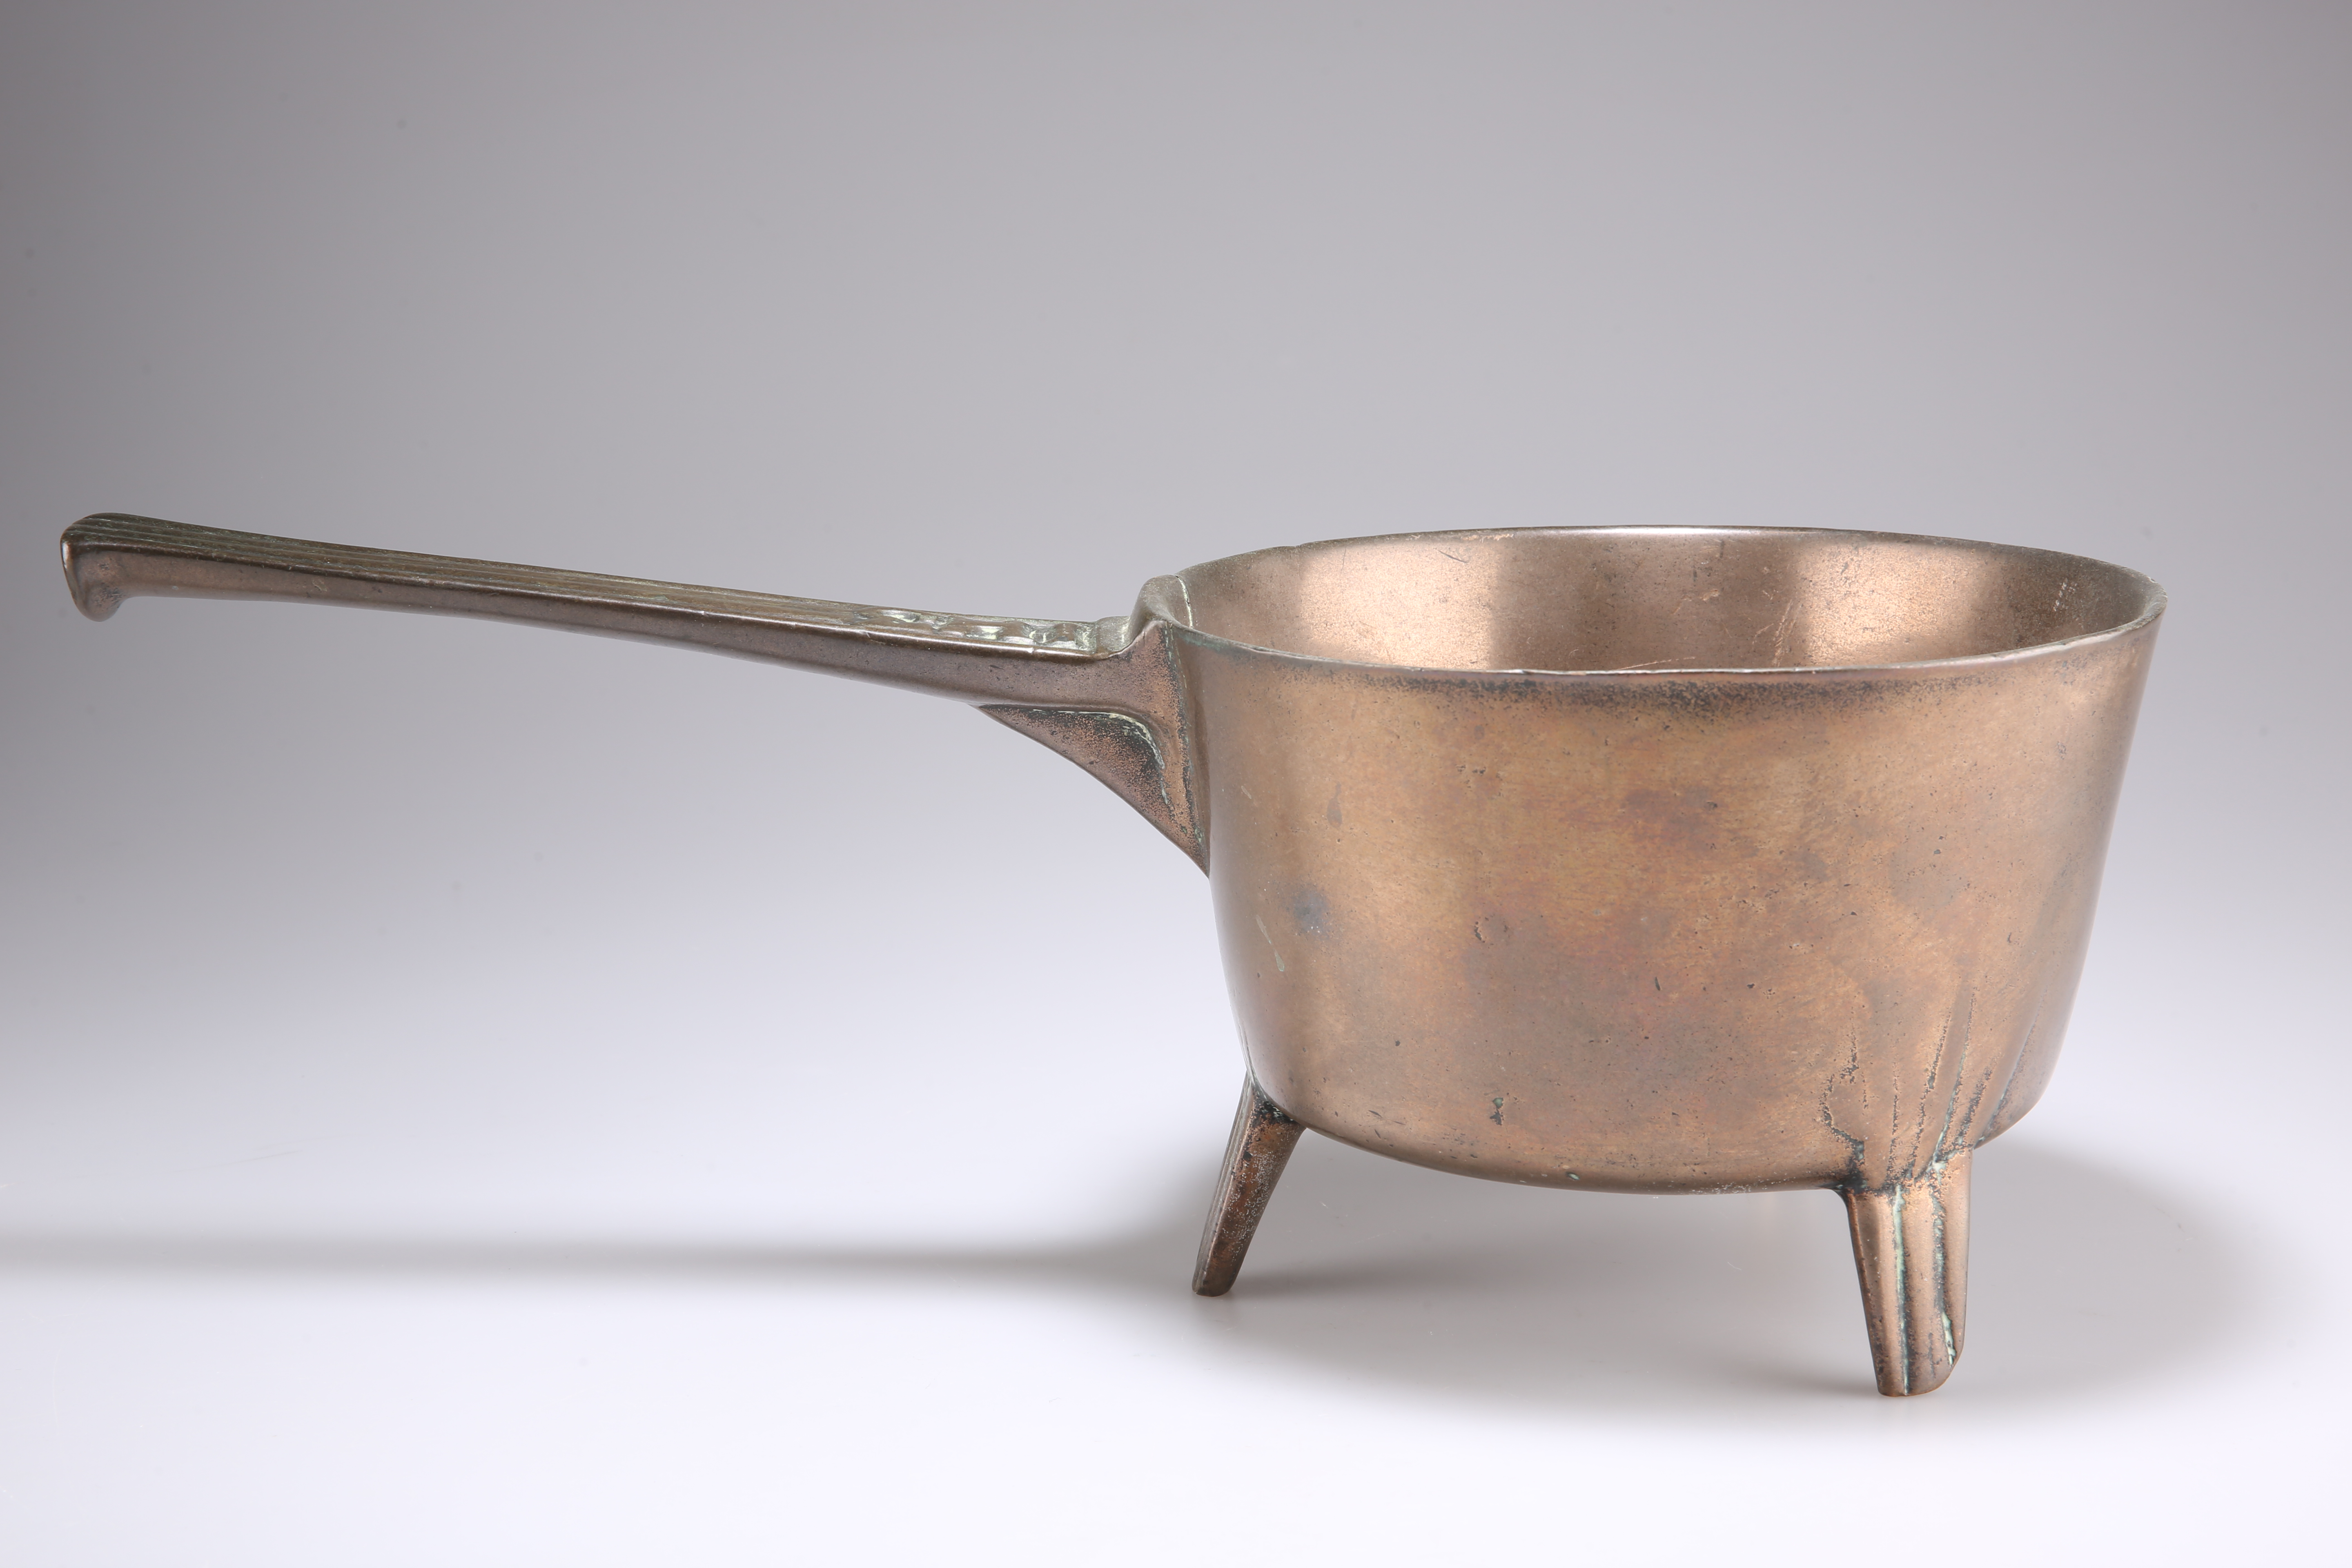 AN 18TH CENTURY BRONZE OR BELL-METAL SKILLET